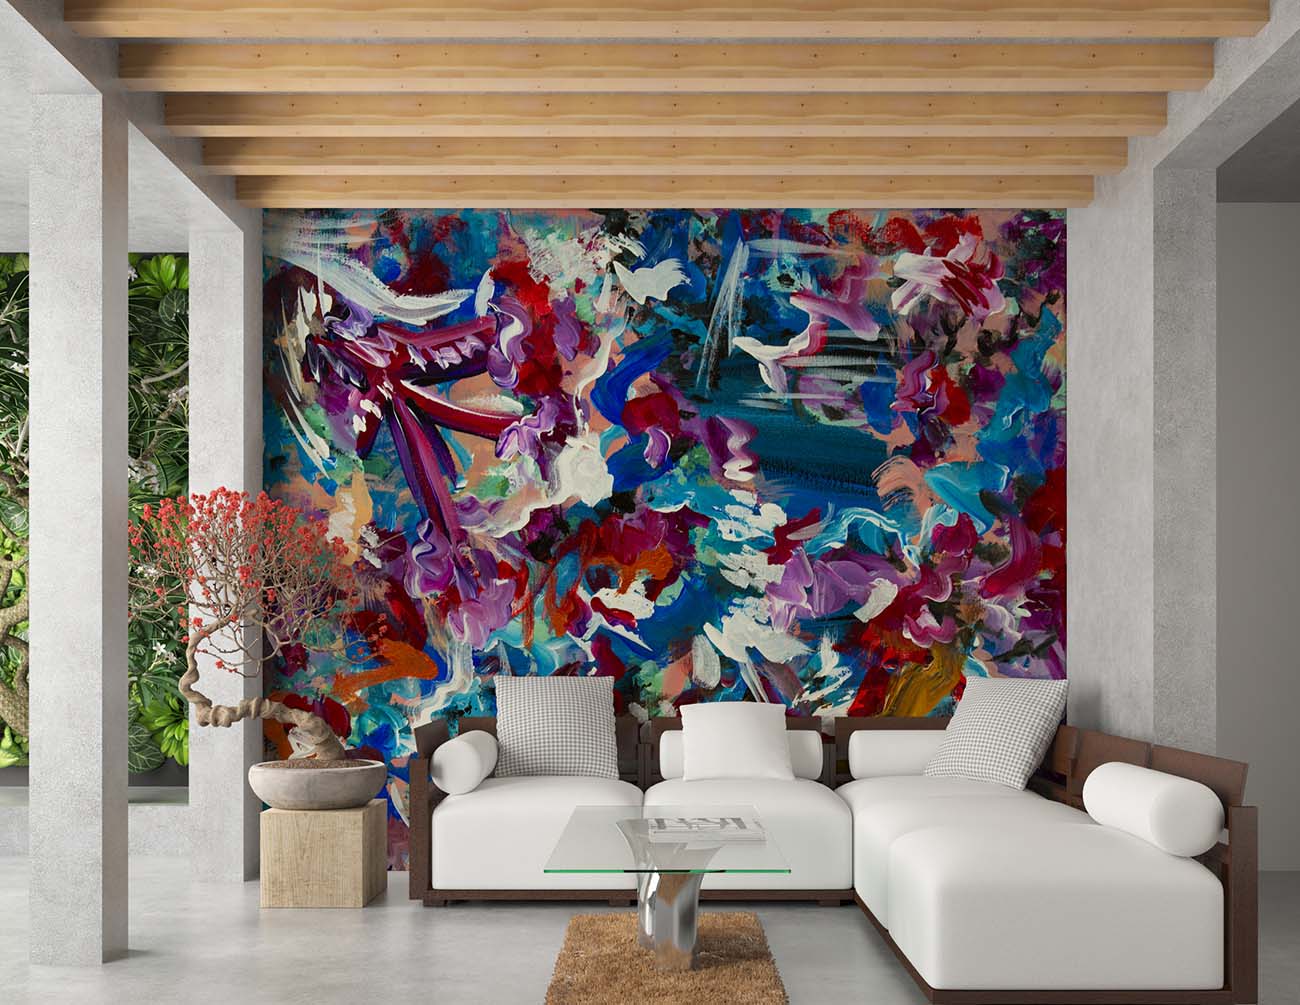 Easter abstract art by Doug LaRue as a wall mural over a sectional couch